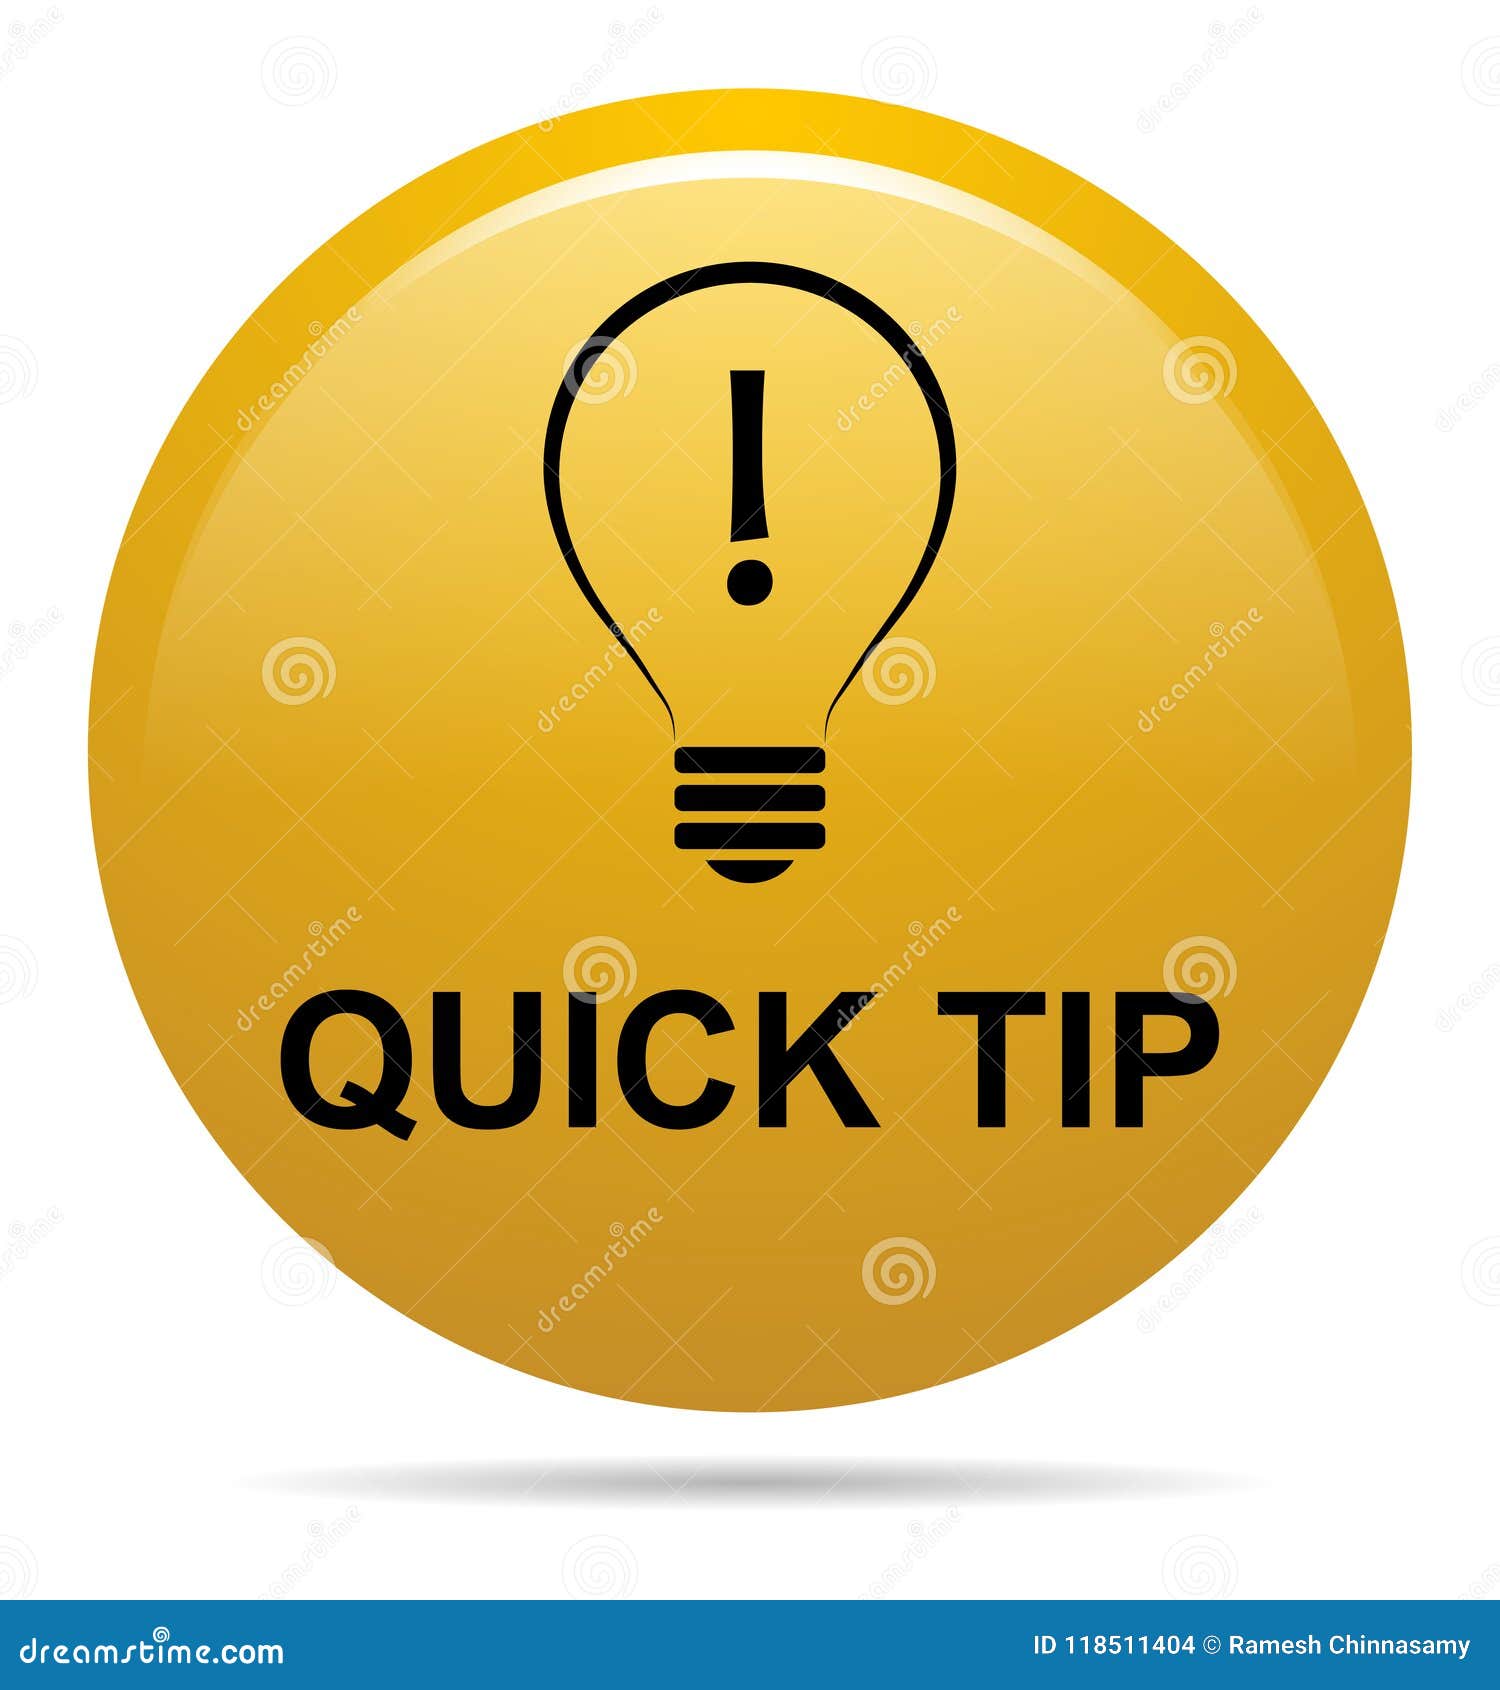 quick tip golden yellow button help and suggestion concept